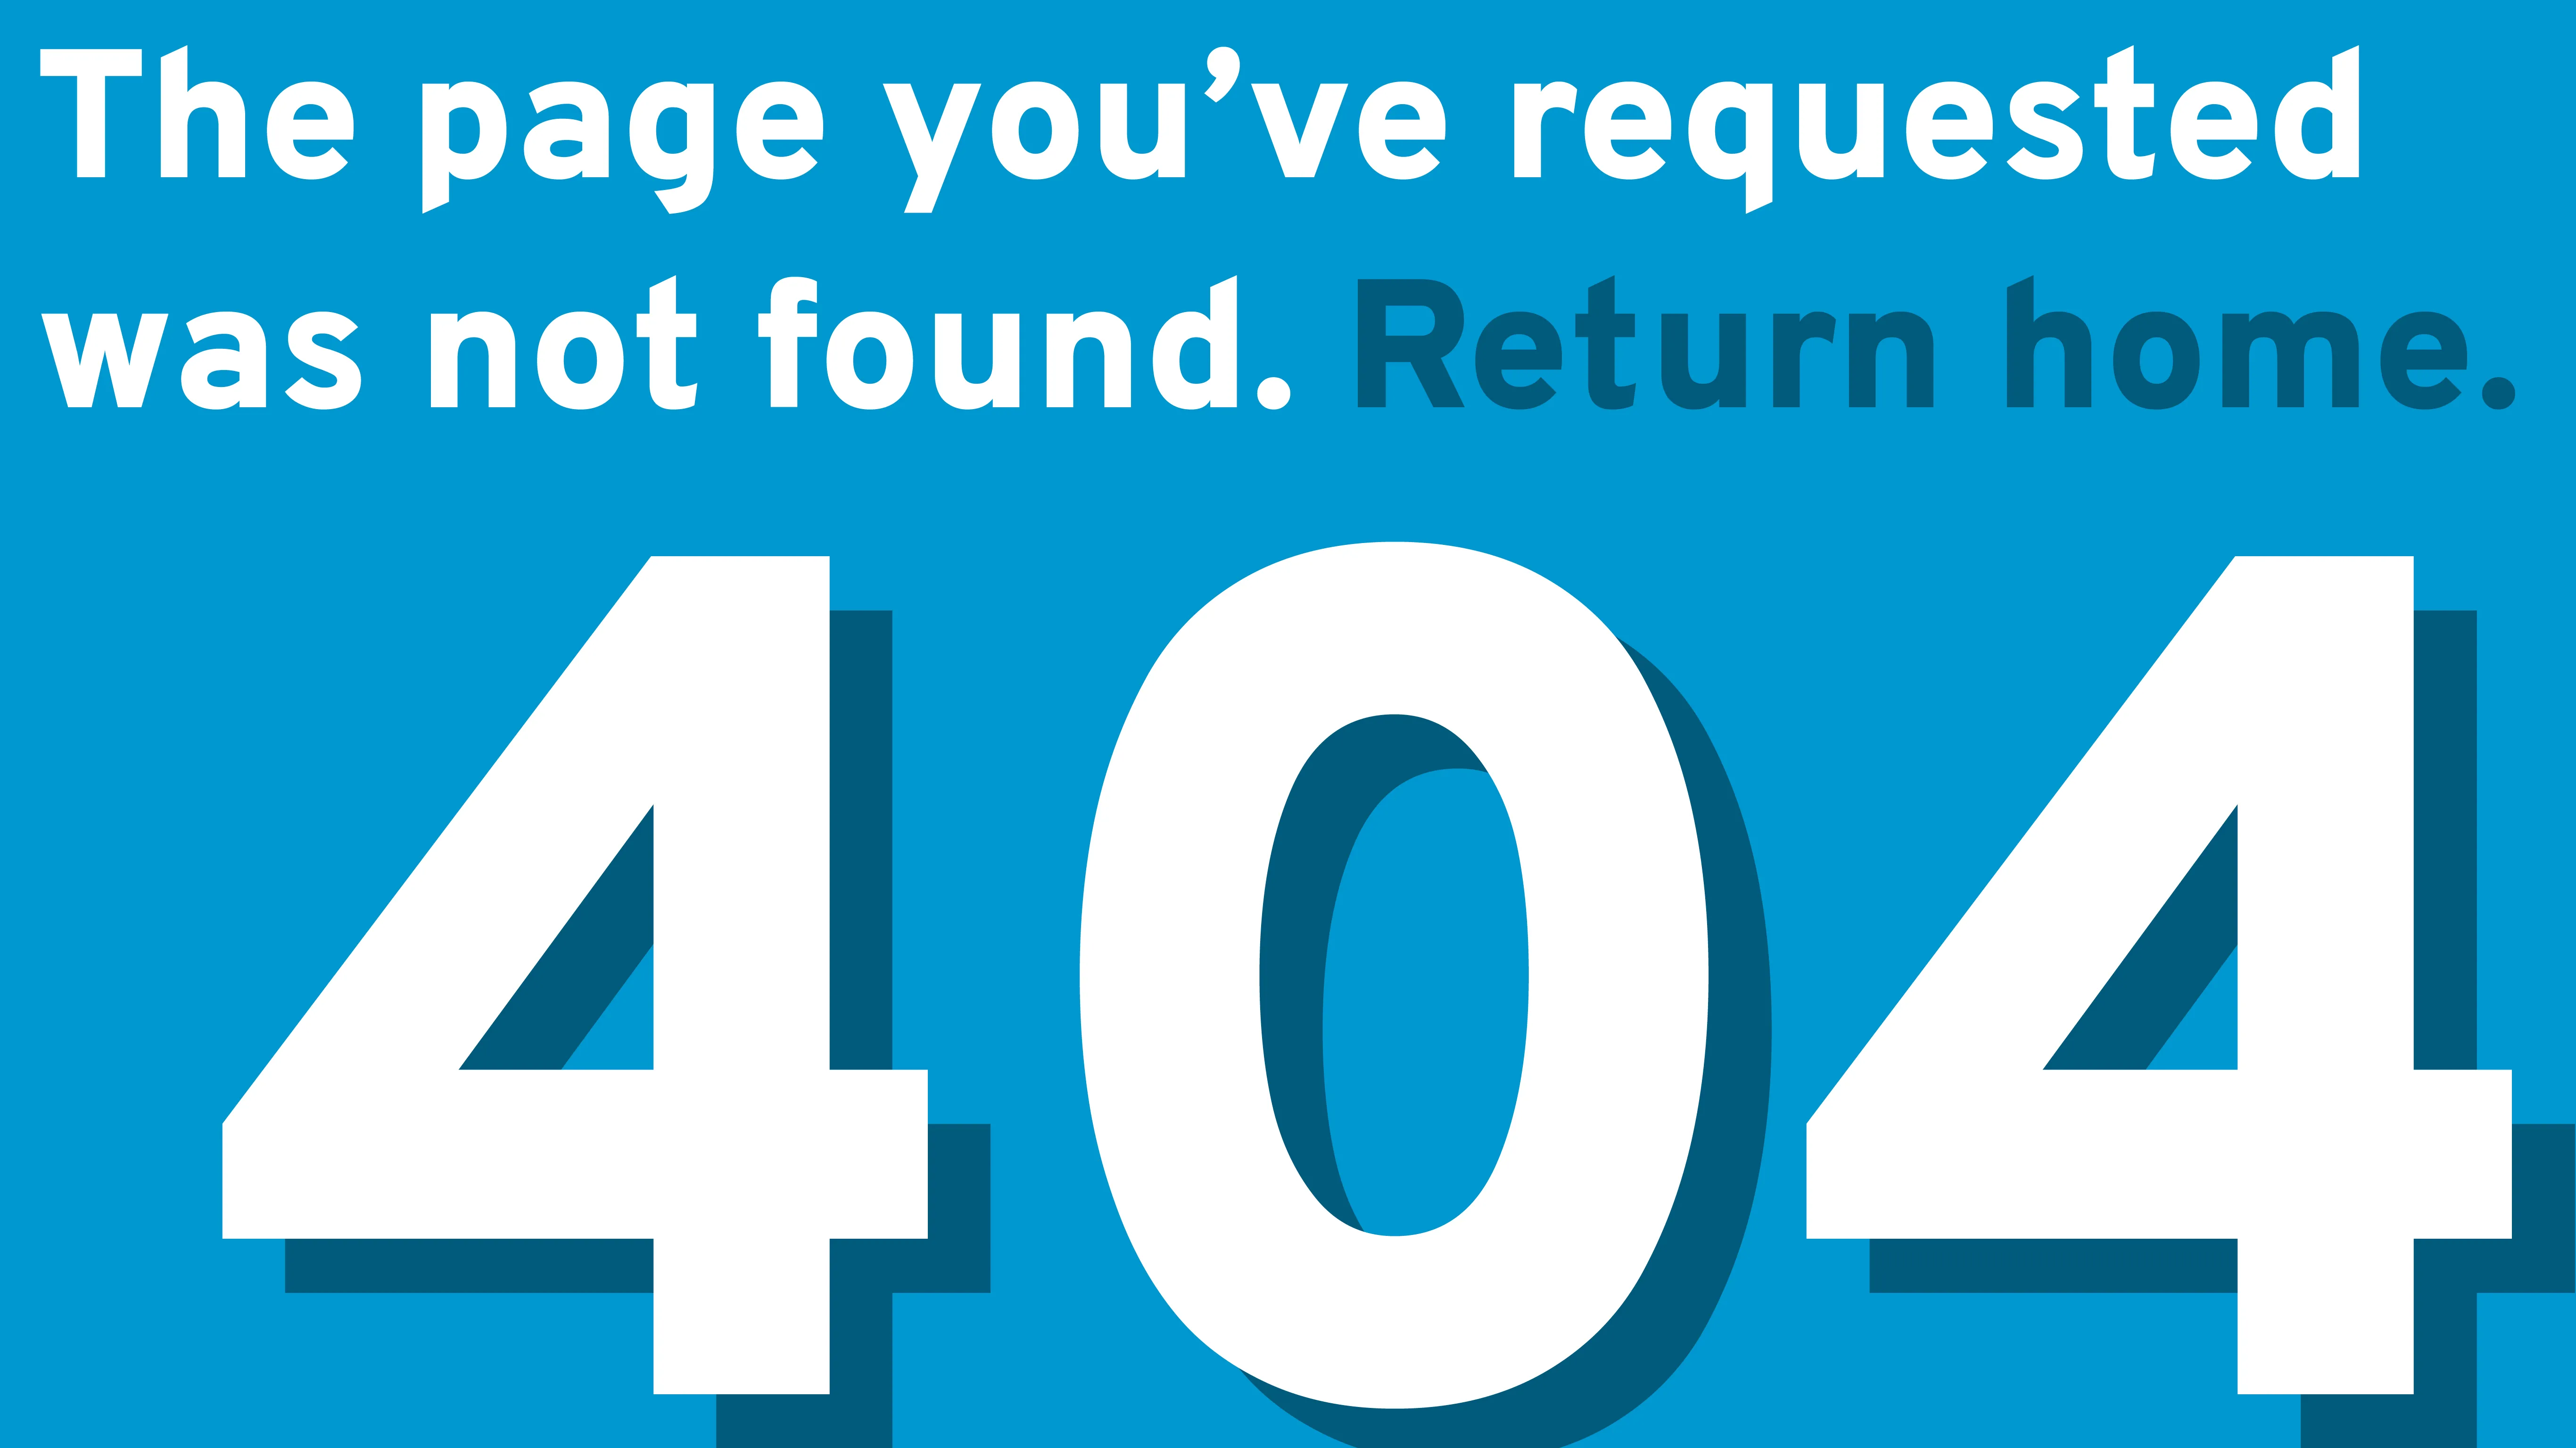 The page you've requested was not found. Return home. 404